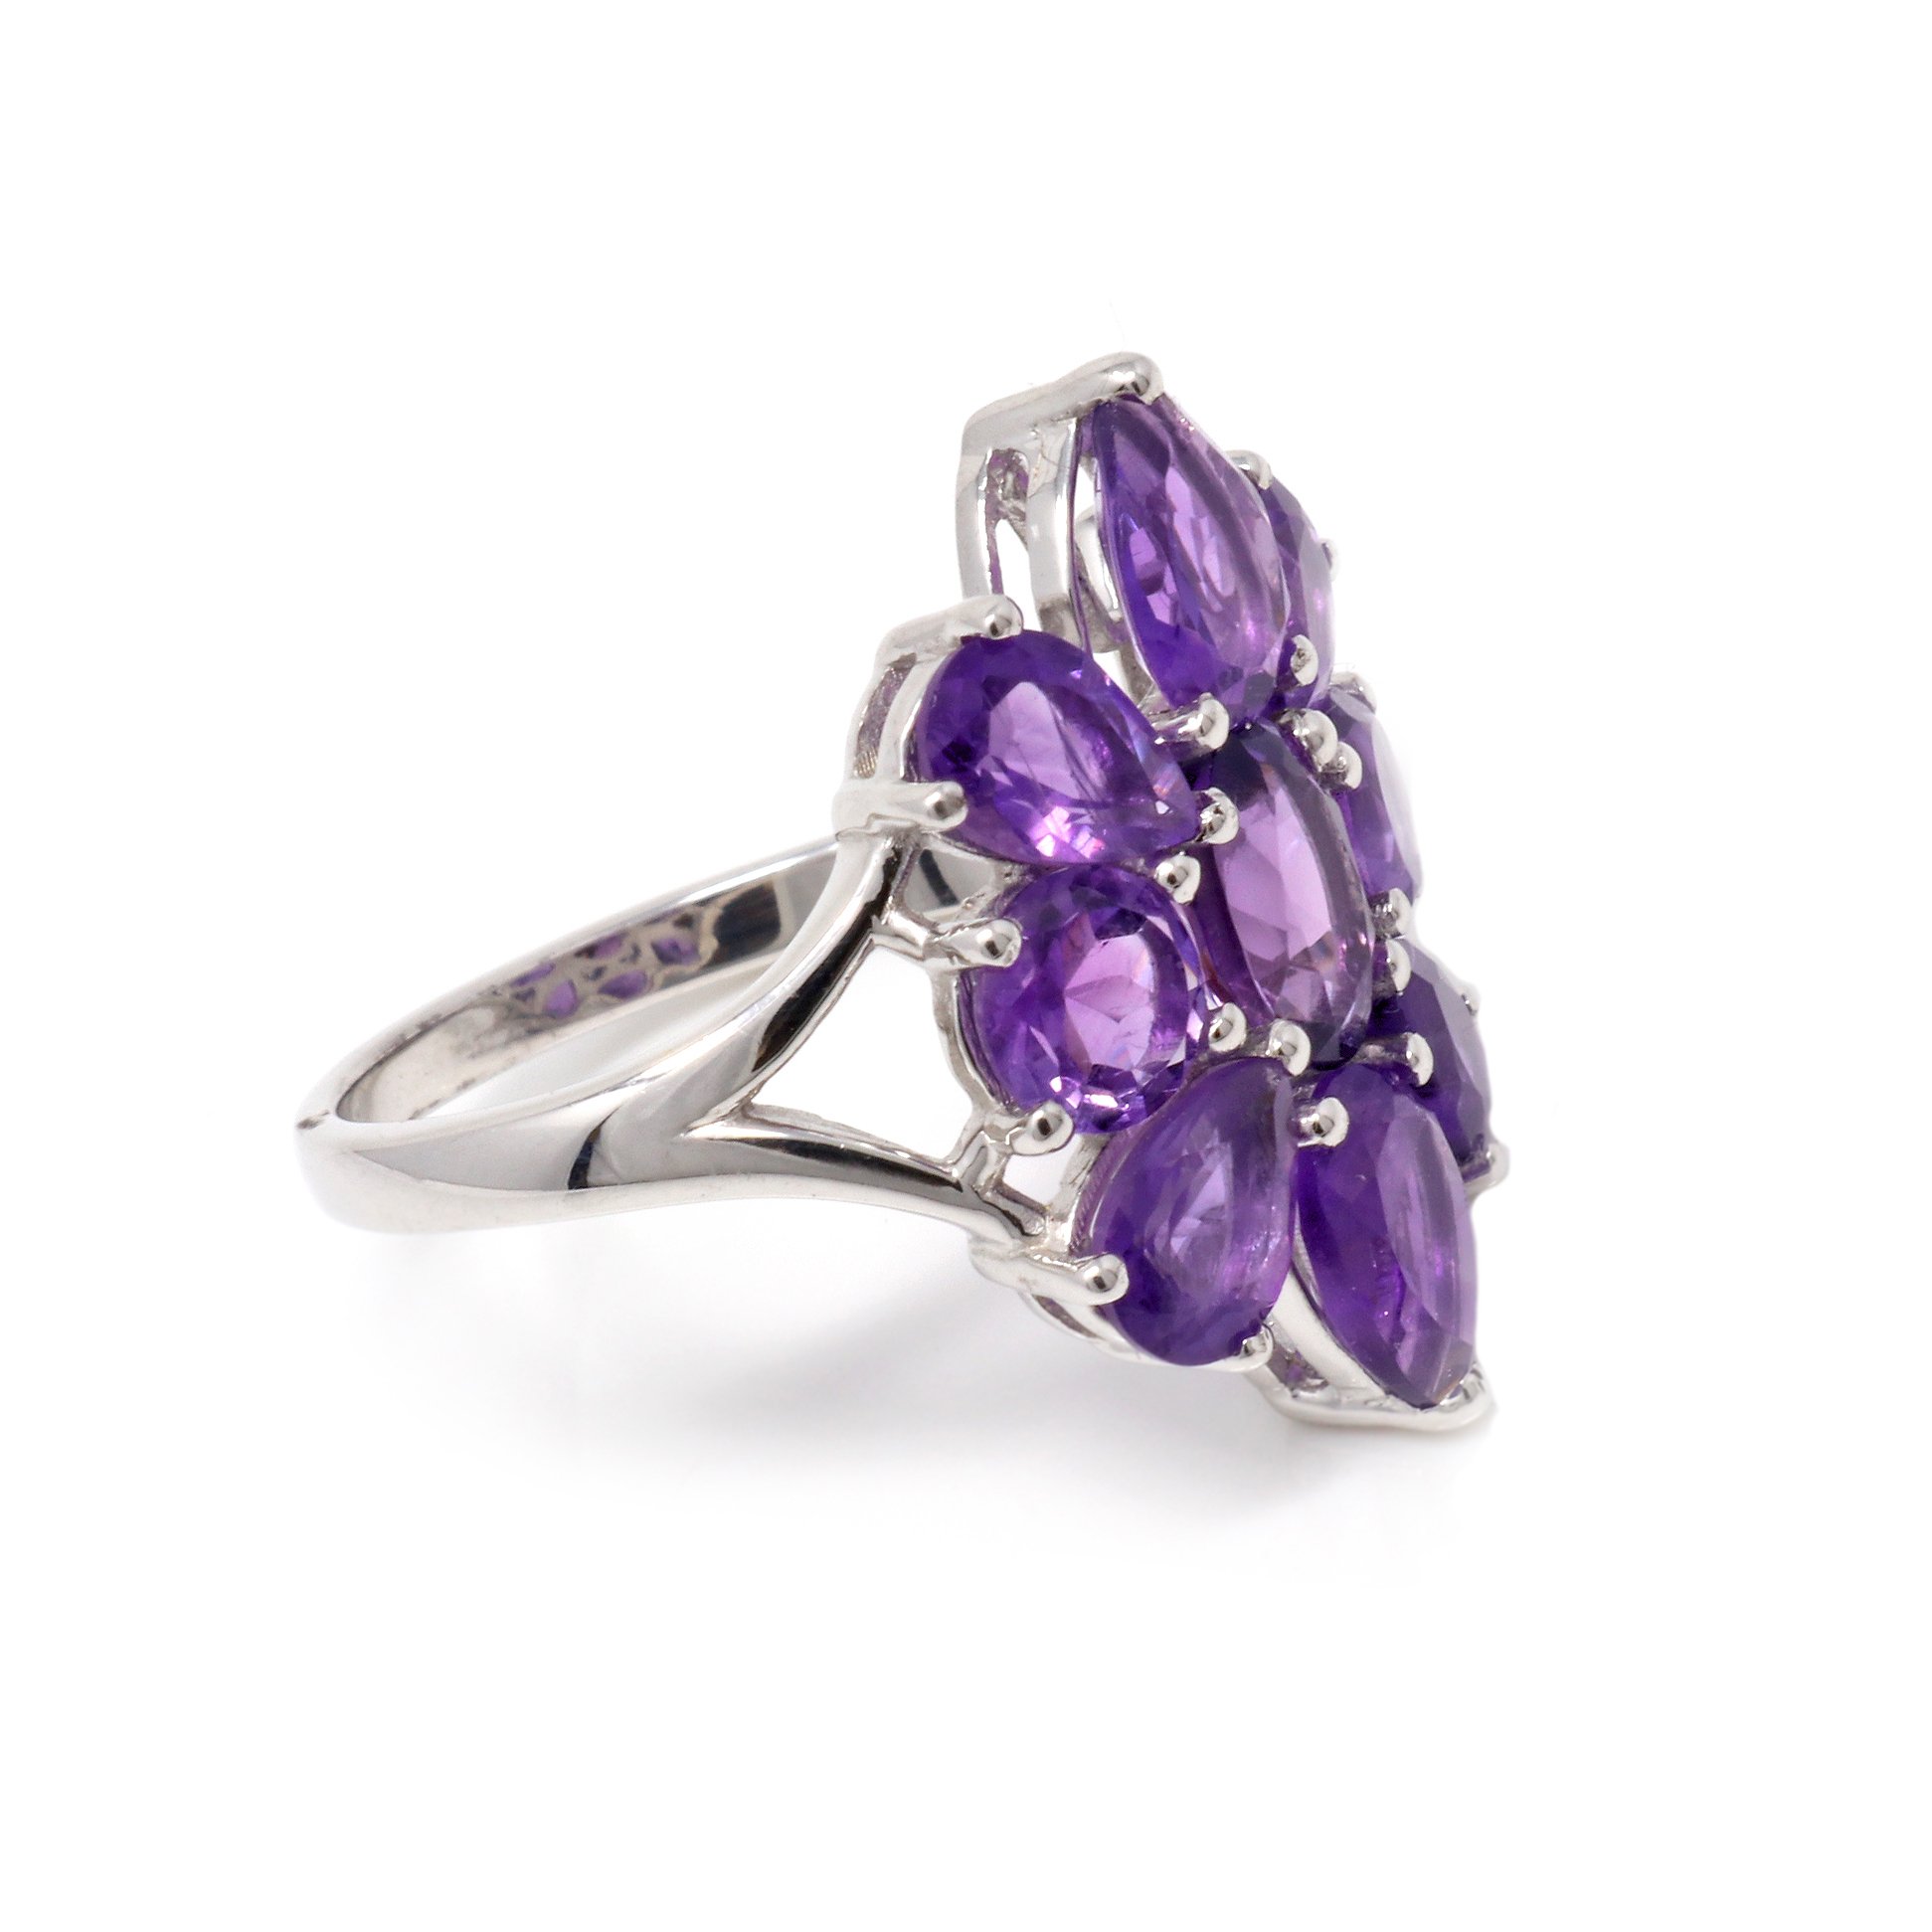 Amethyst Ring Size 9 - with 9 Faceted Stones In Shape Of Dahlia Flower Set On Silver Band With Cutout Top - Prong Set